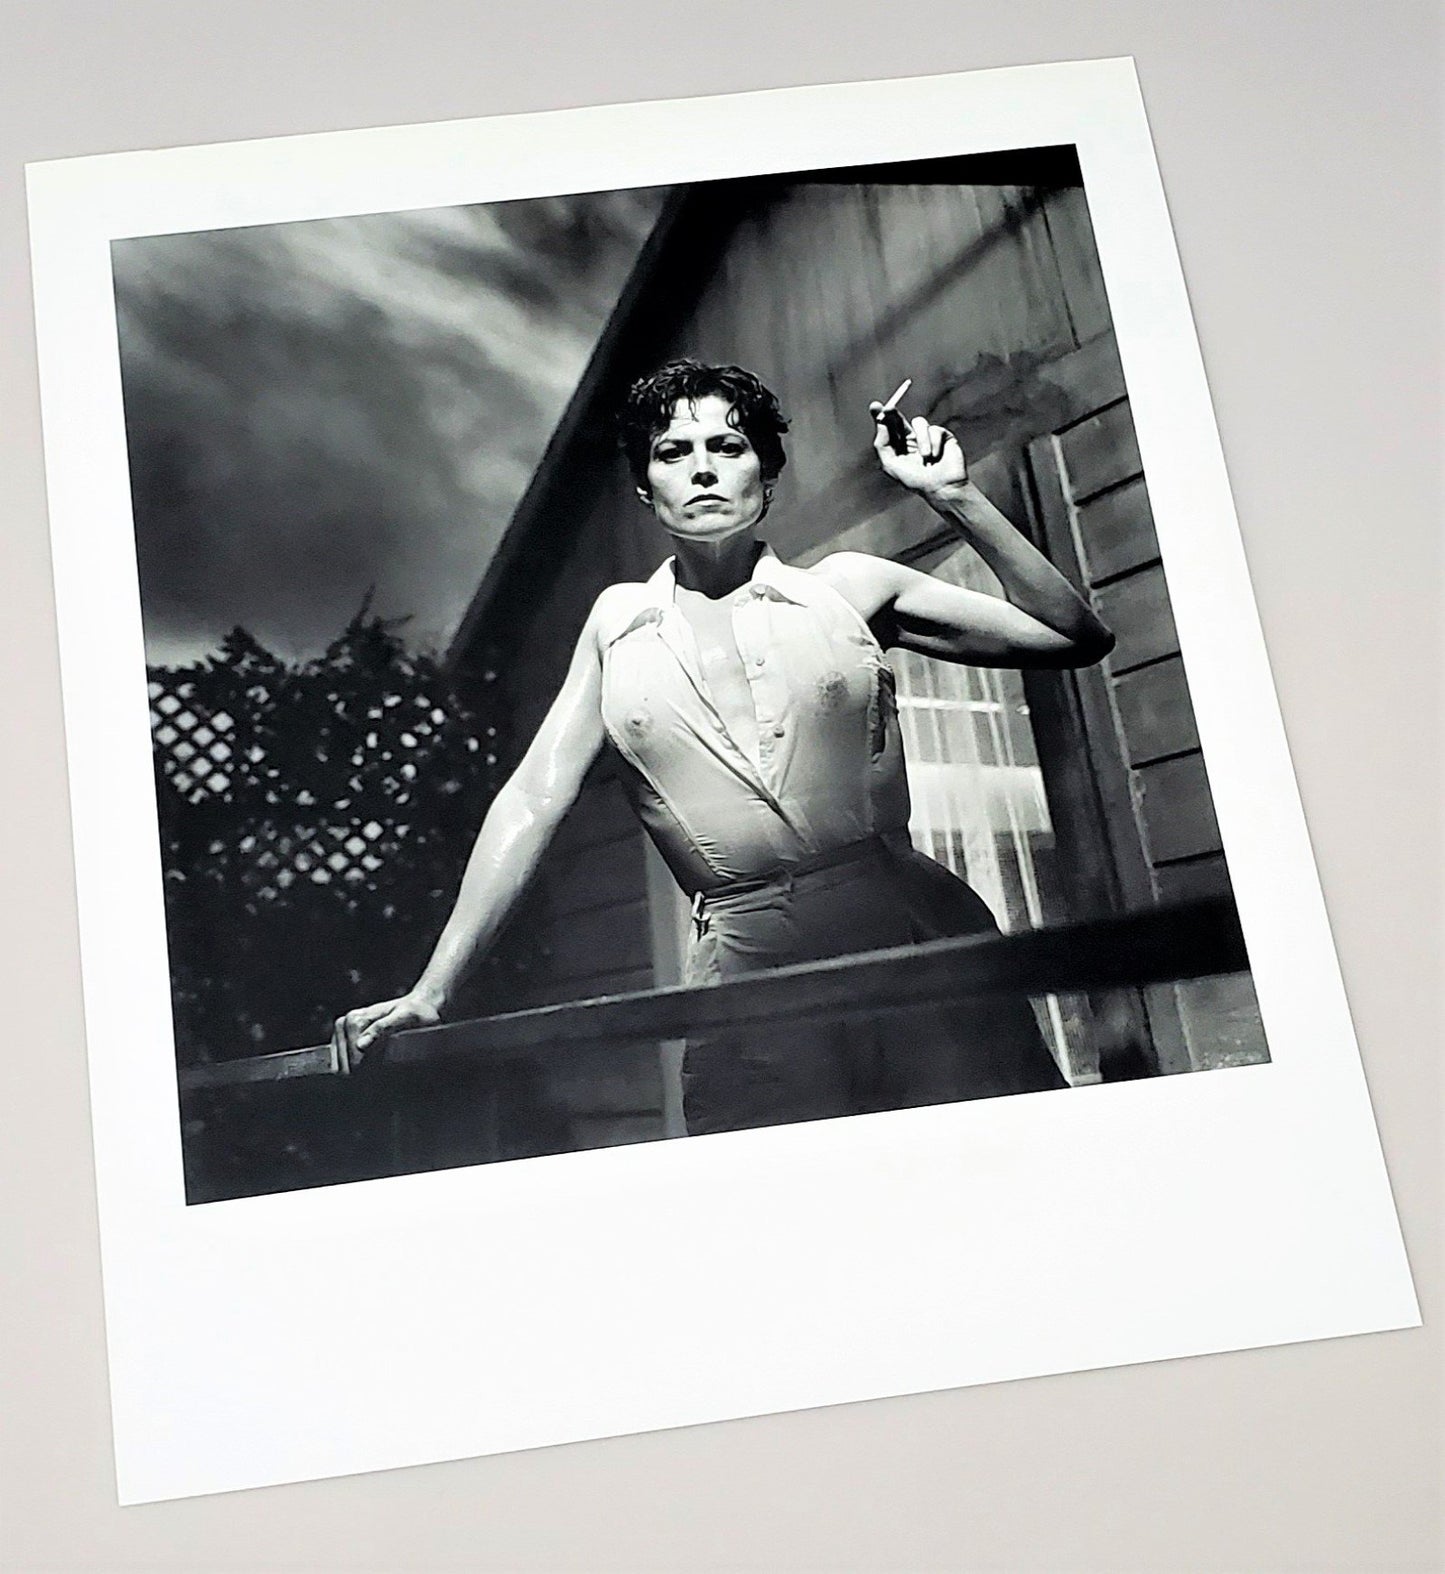 1995 Sigourney Weaver photograph featured in Helmut Newton: Work hardcover book  released in 2000